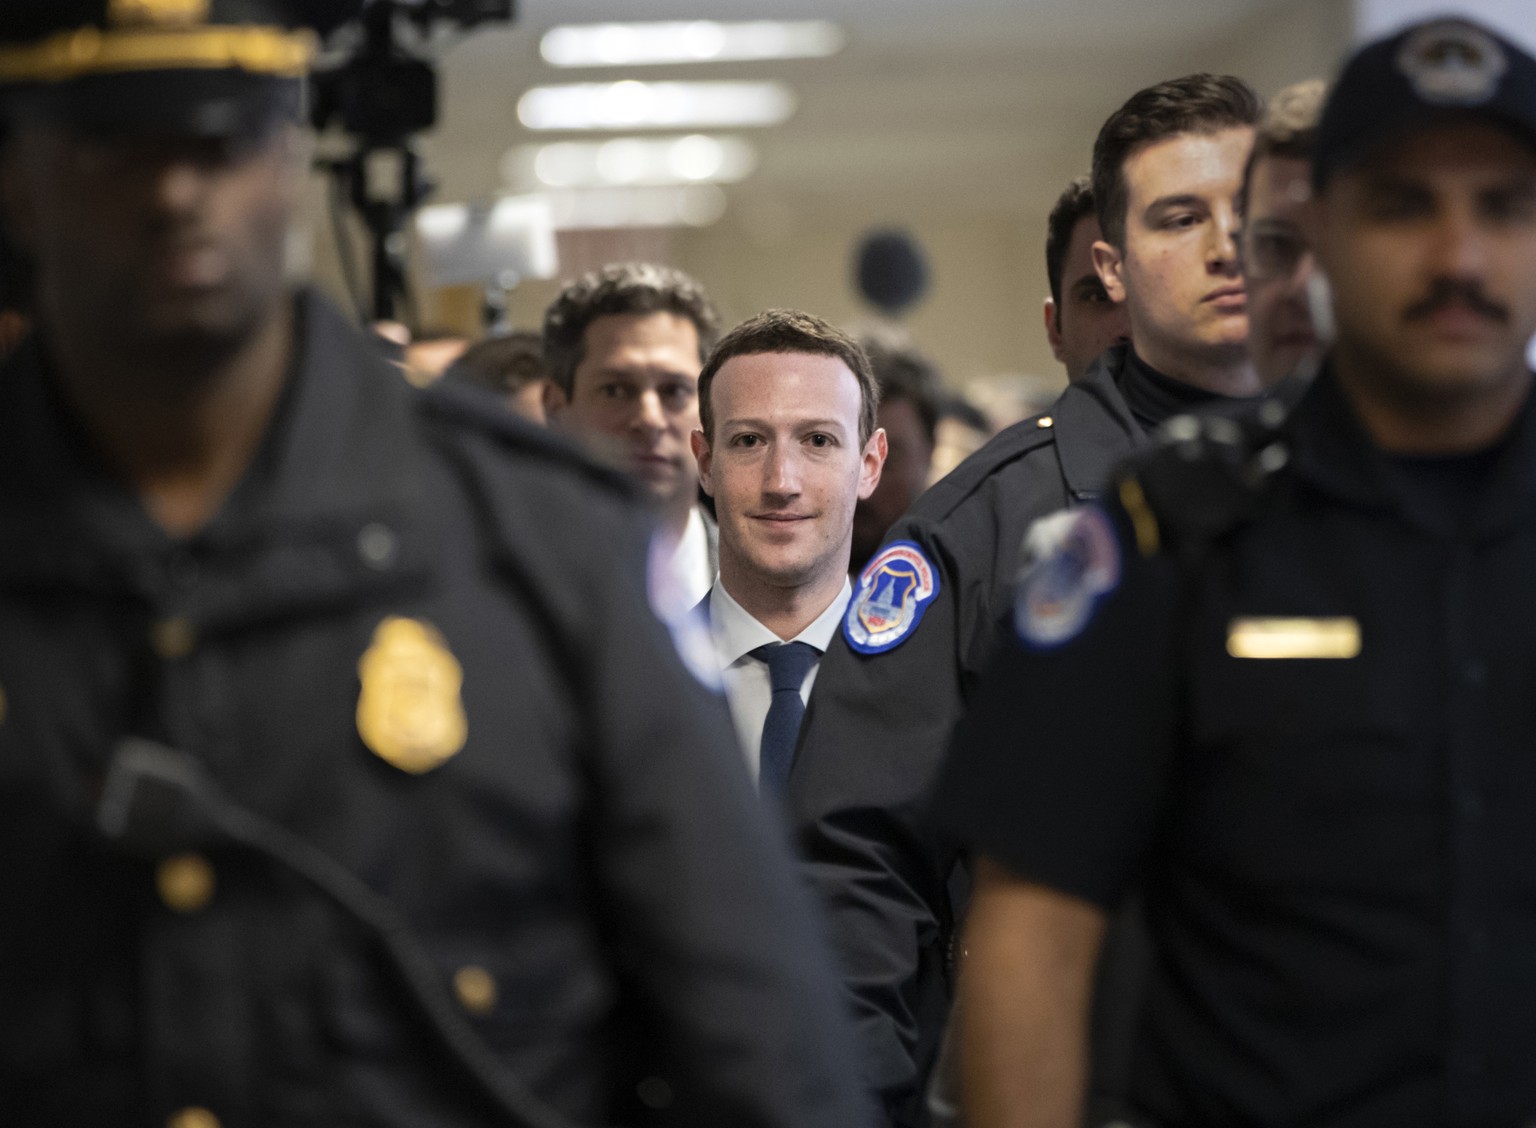 Facebook CEO Mark Zuckerberg arrives on Capitol Hill in Washington, Monday, April 9, 2018, to meet with Sen. Dianne Feinstein, D-Calif., the ranking member of the Senate Judiciary Committee. Zuckerber ...